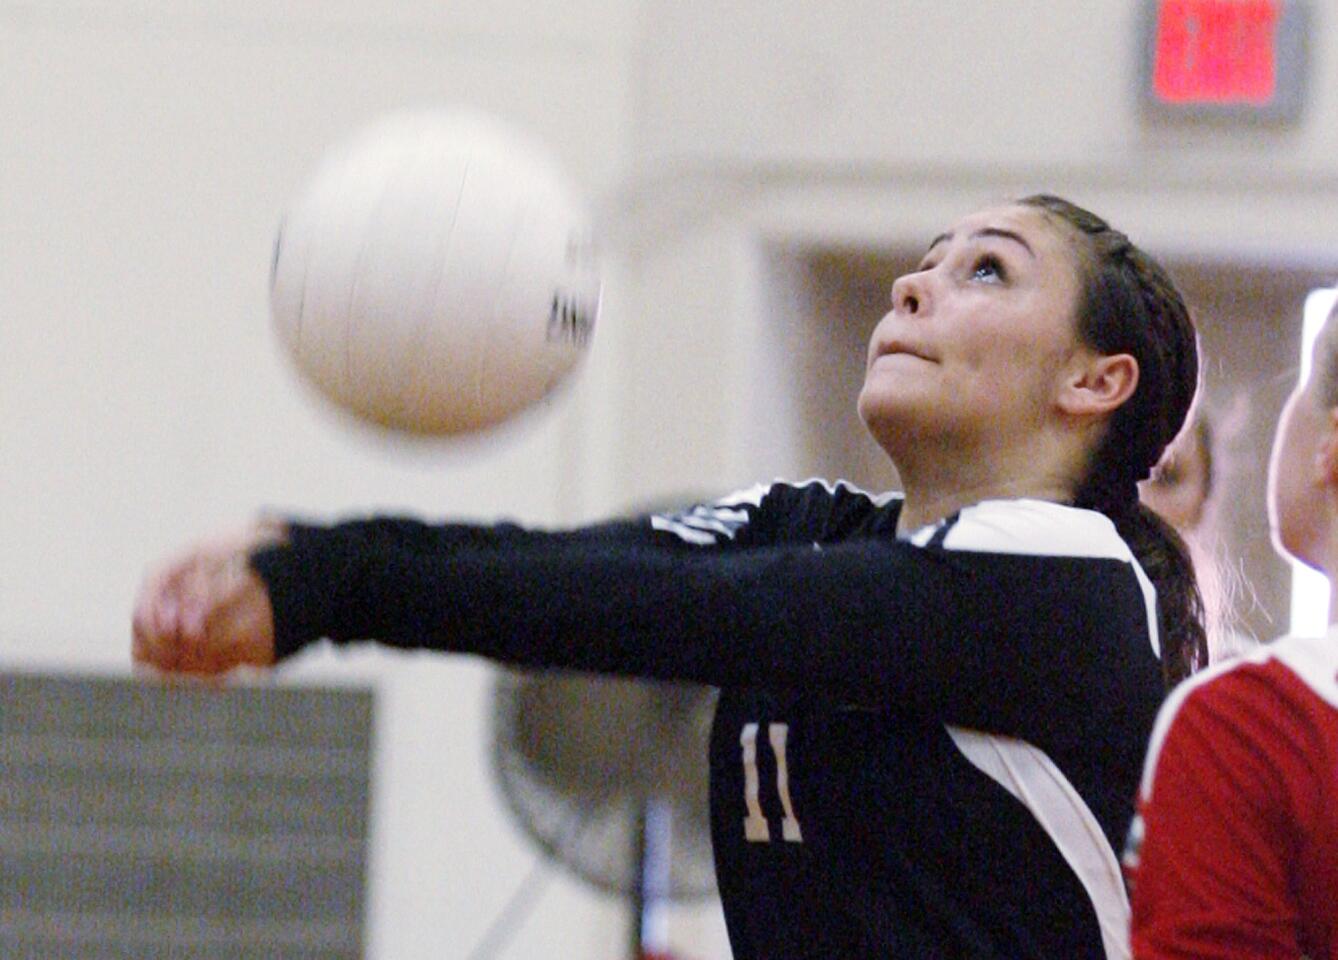 Photo Gallery: Burroughs v. Pasadena Pacific League girls volleyball